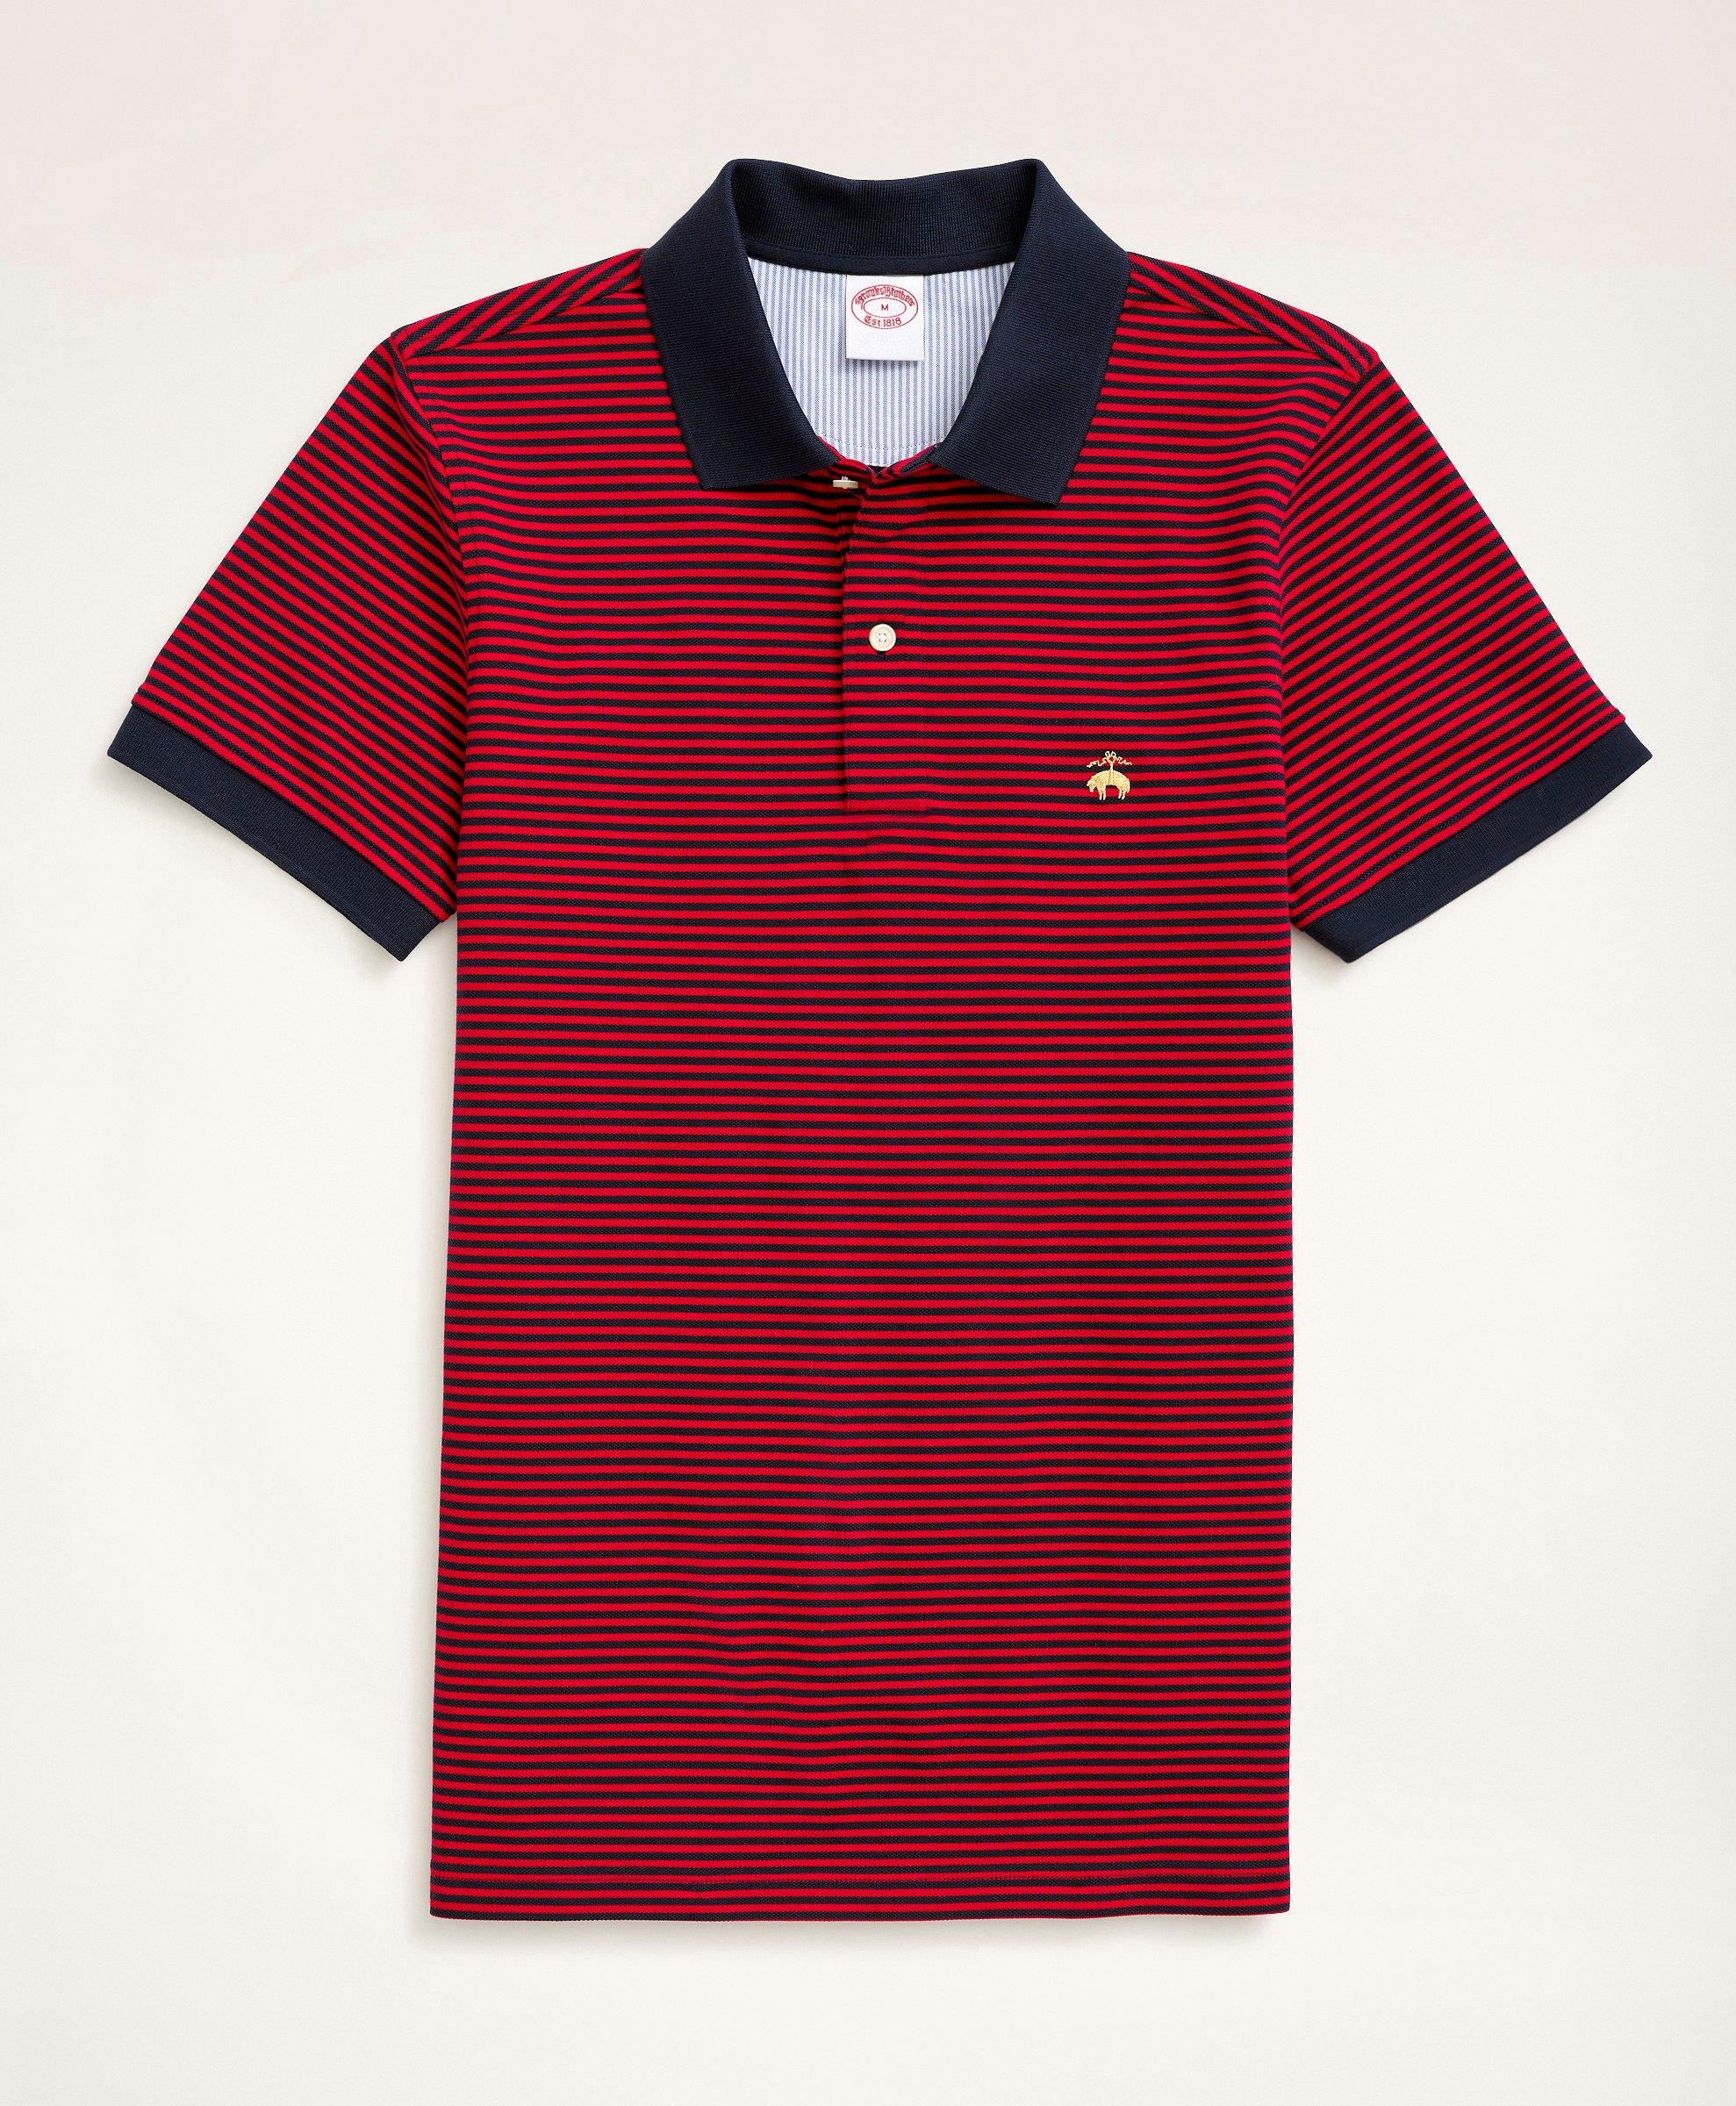 Brooks Brothers Golden Fleece Slim Fit Feeder Stripe Polo Shirt | Red | Size 2xl